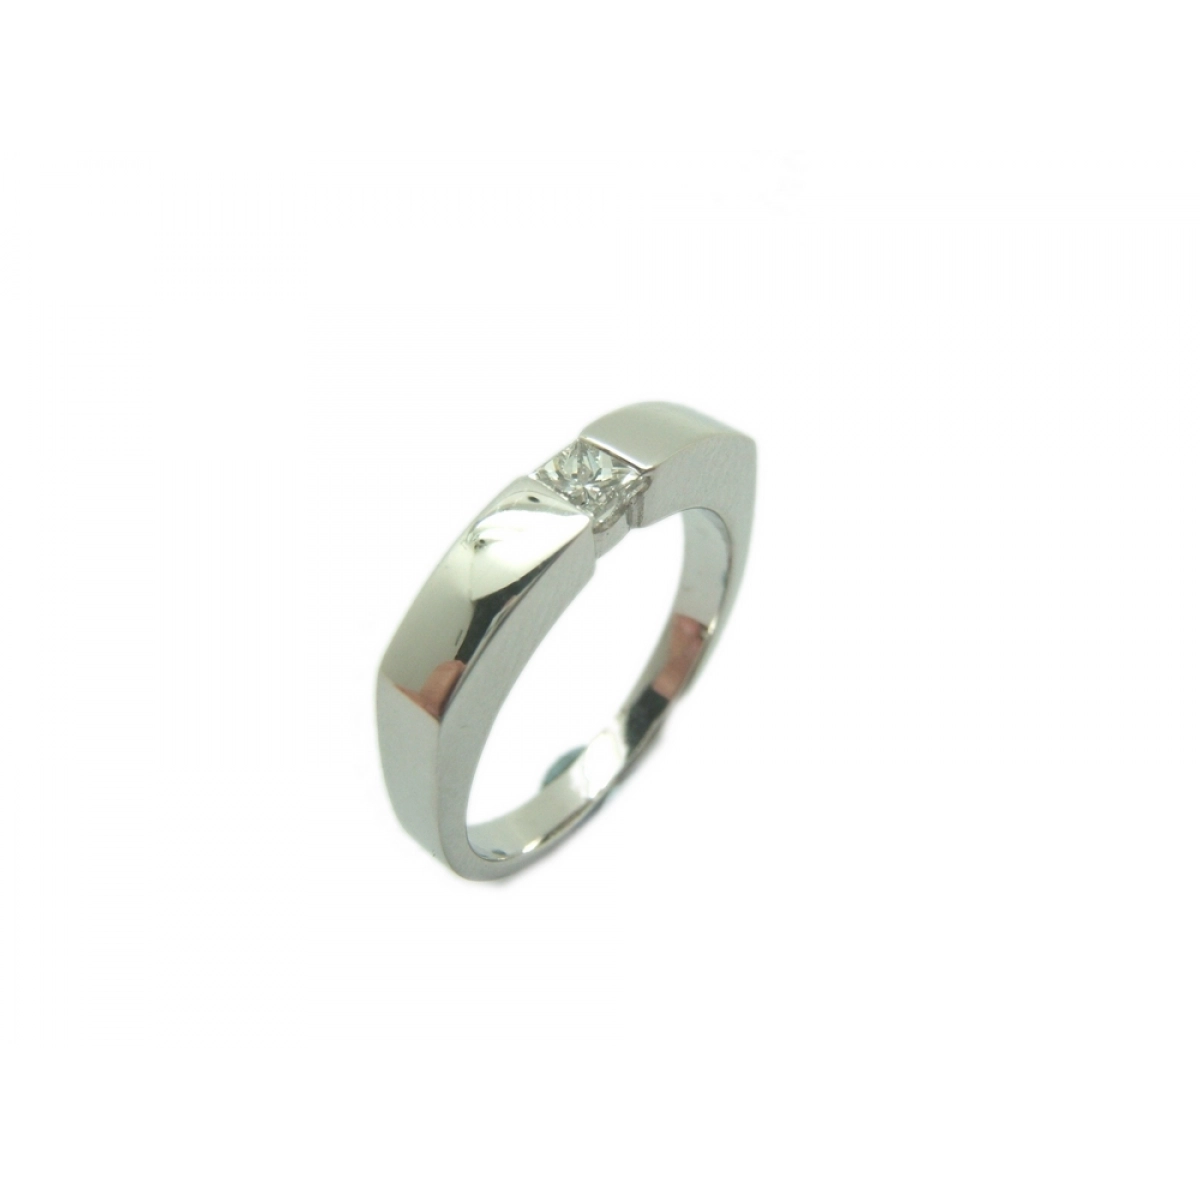 RING SOLITAIRE WHITE GOLD WITH DIAMOND A-156 B-79